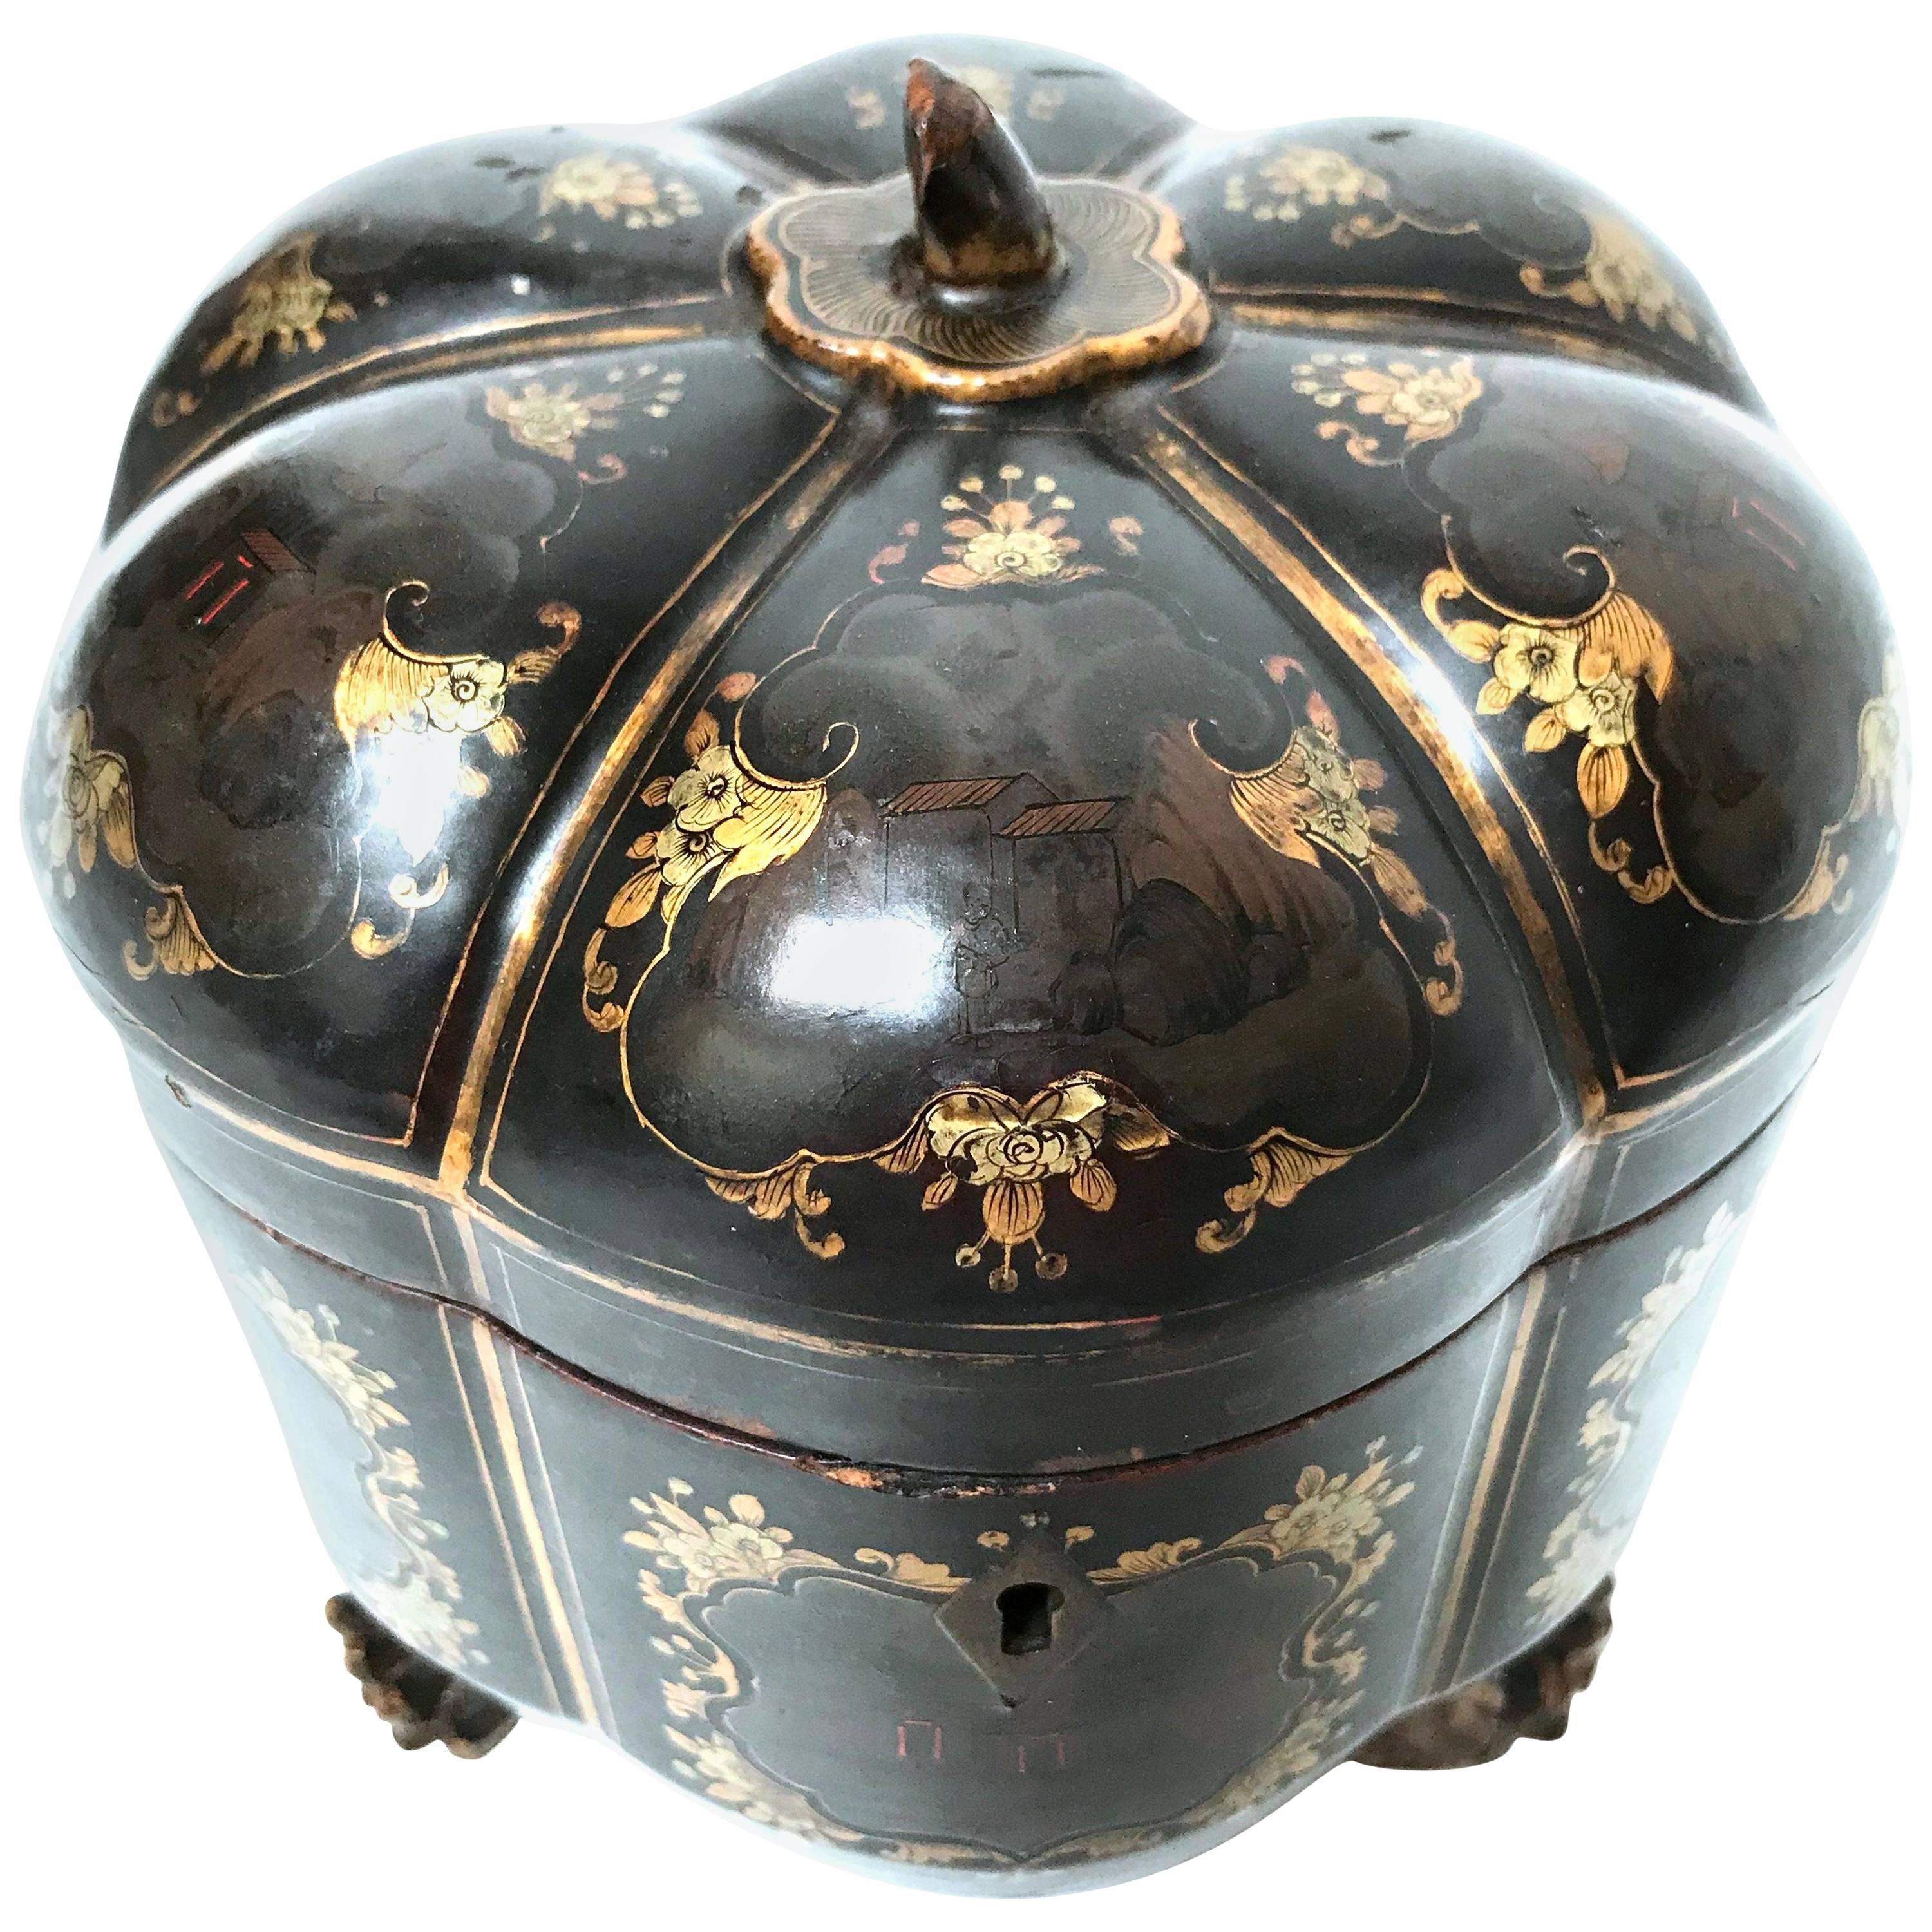 19th Century Chinese Export Melon Form Tea Caddy